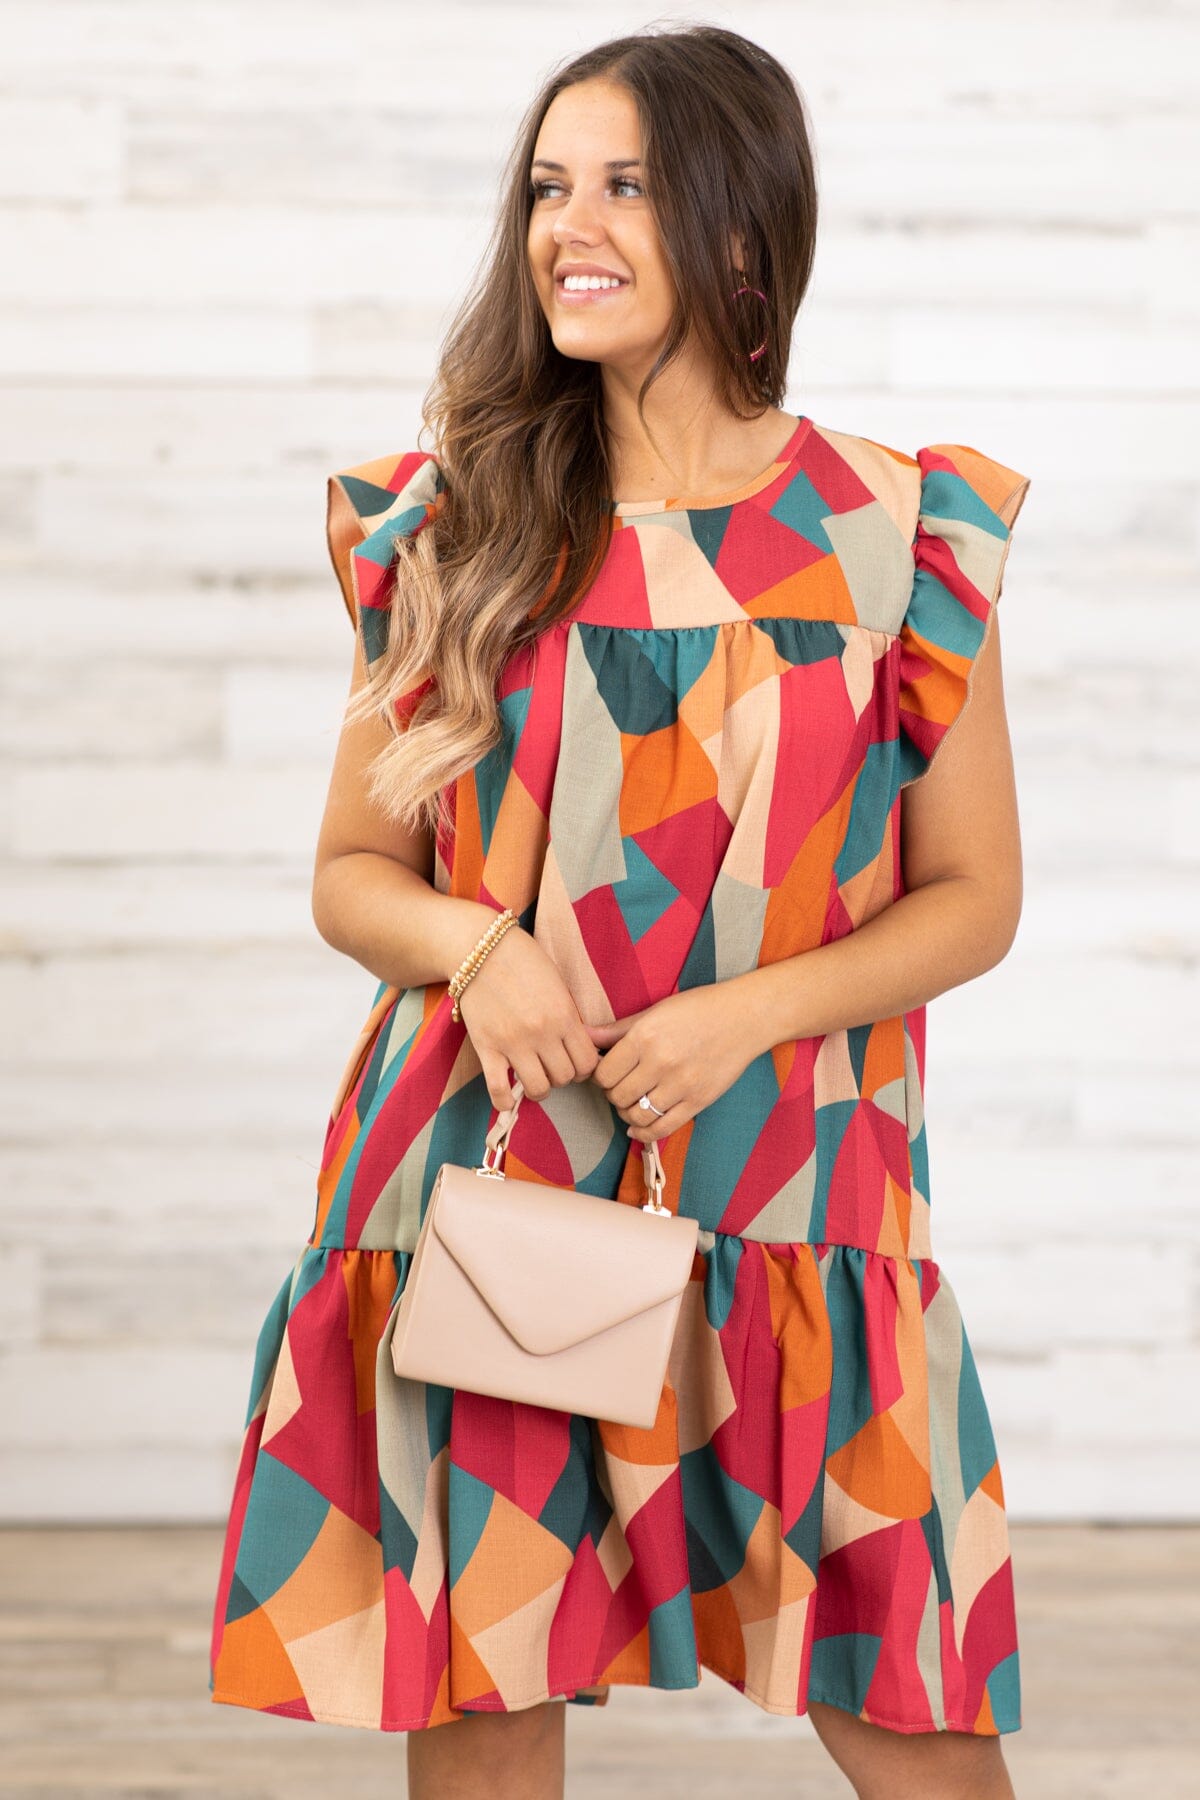 Teal and Raspberry Multicolor Abstract Dress - Filly Flair